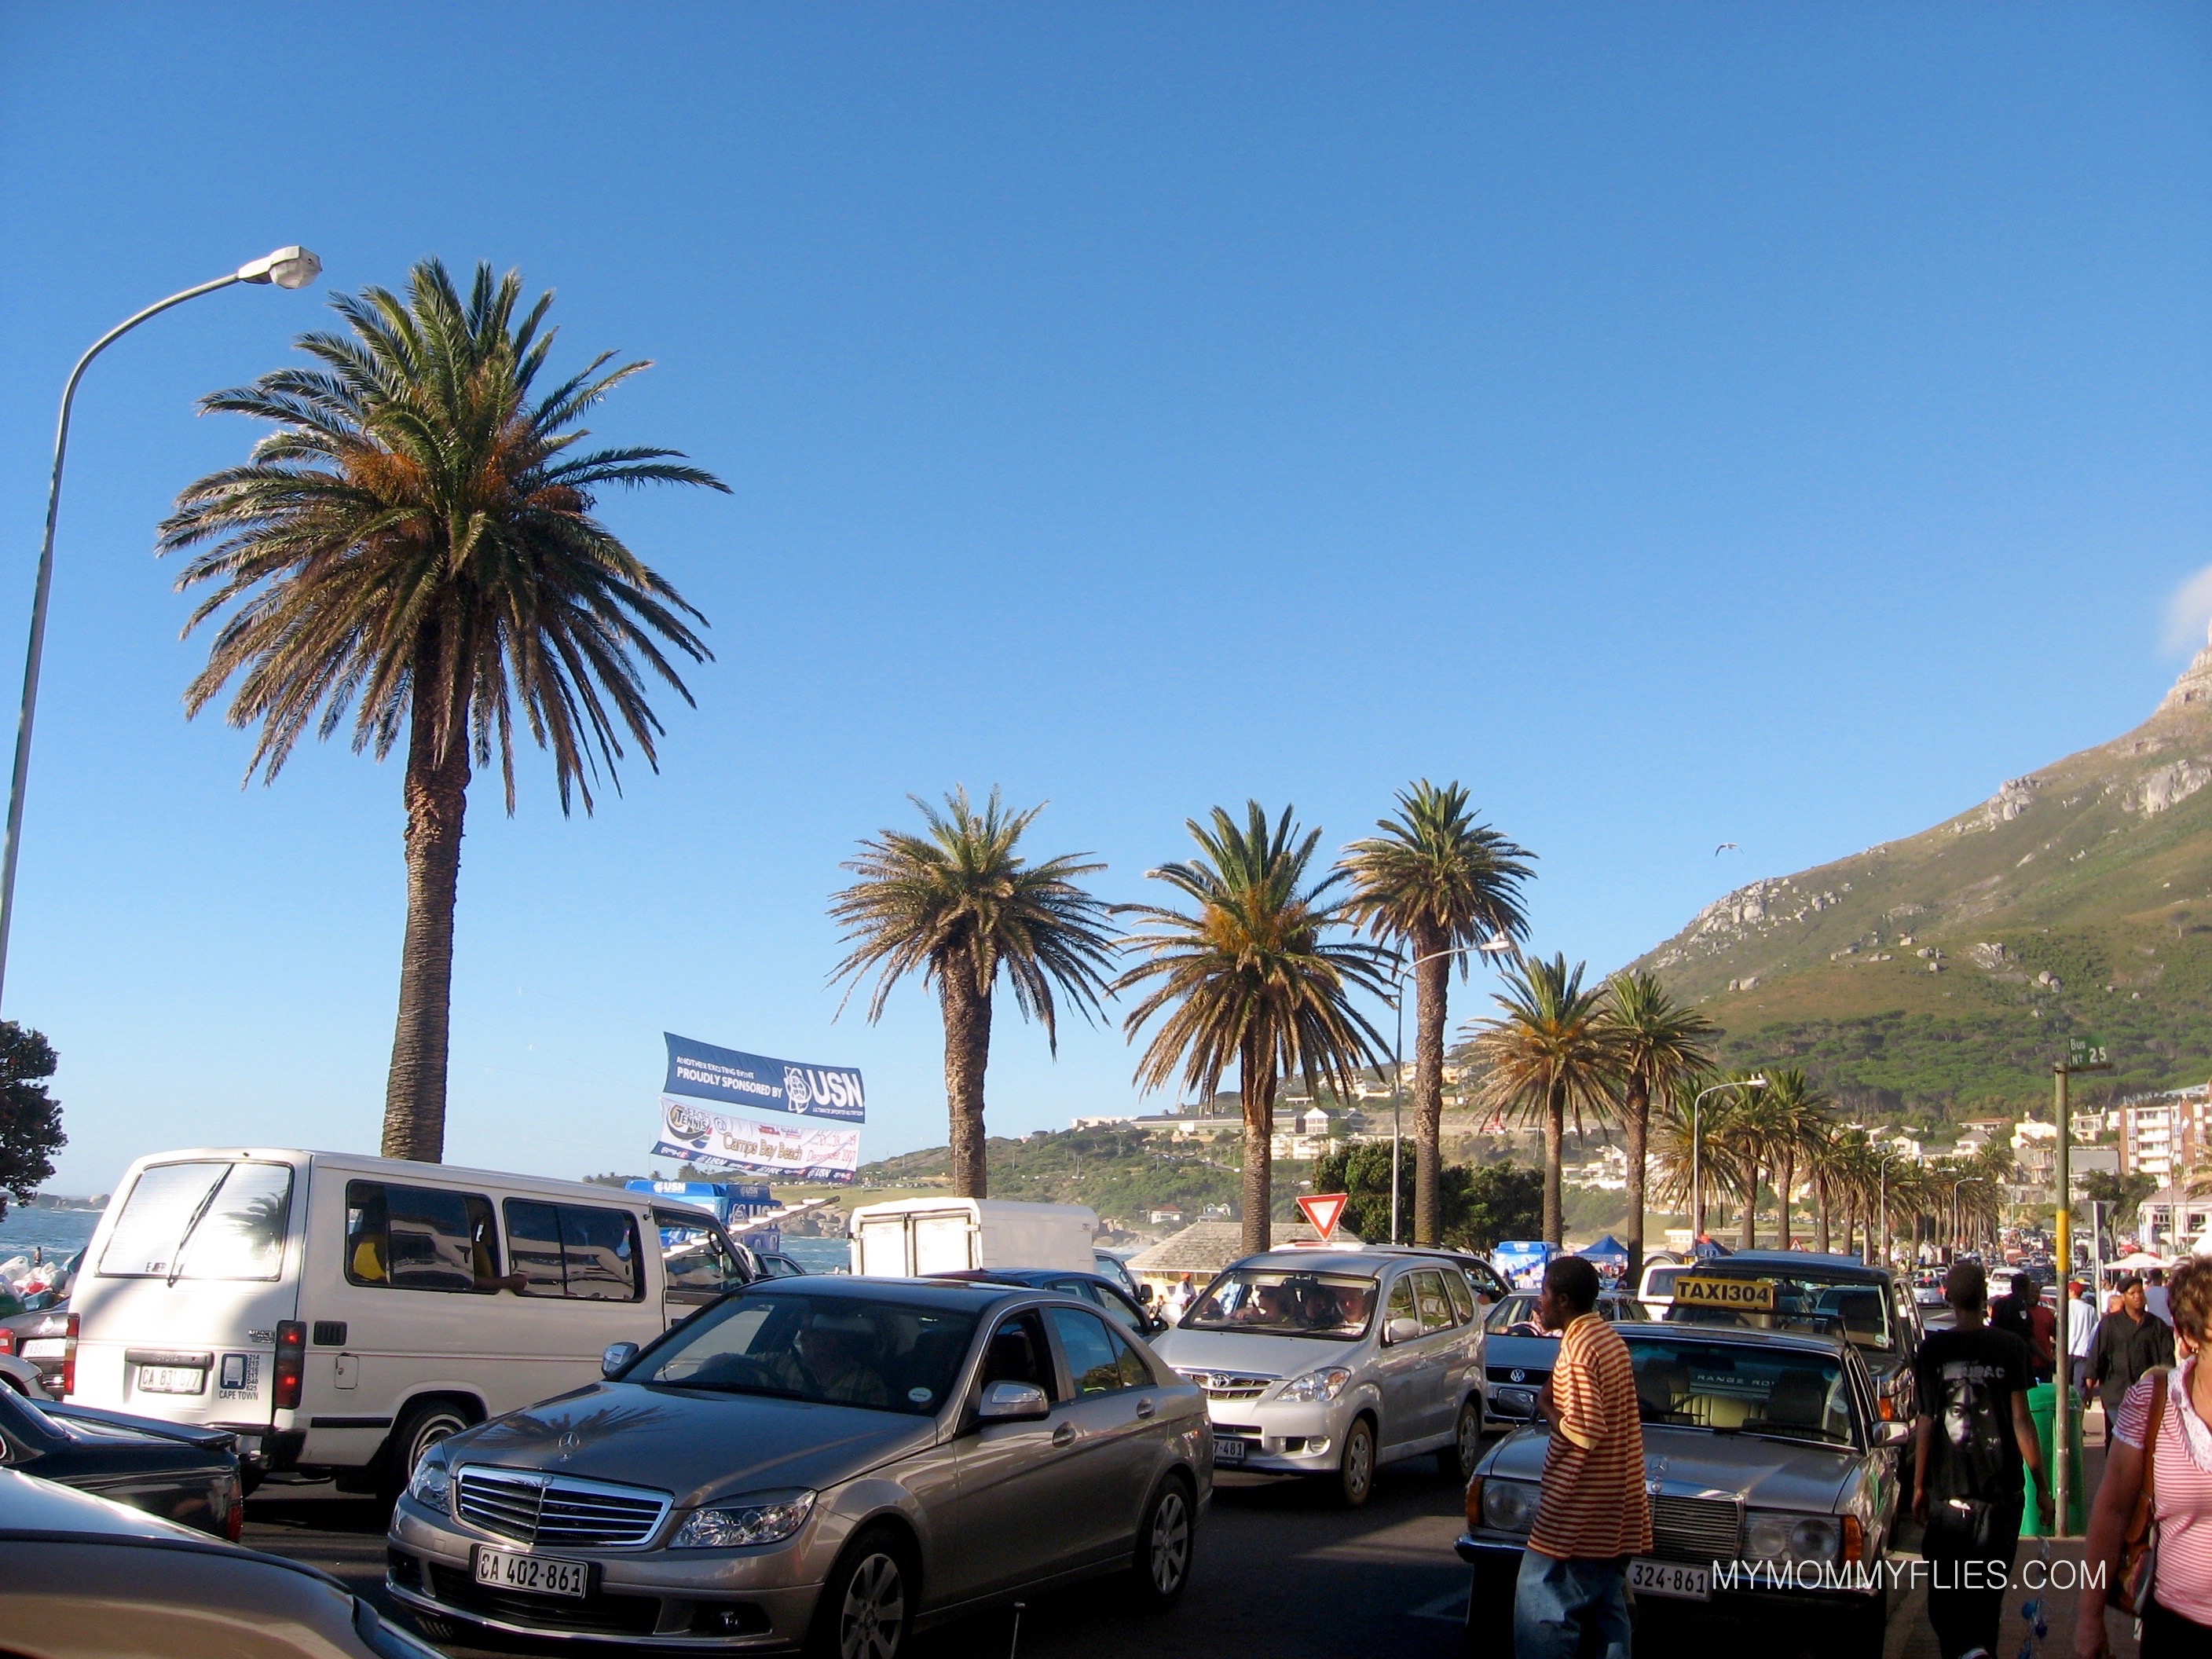 Cape Town South Africa in Pictures